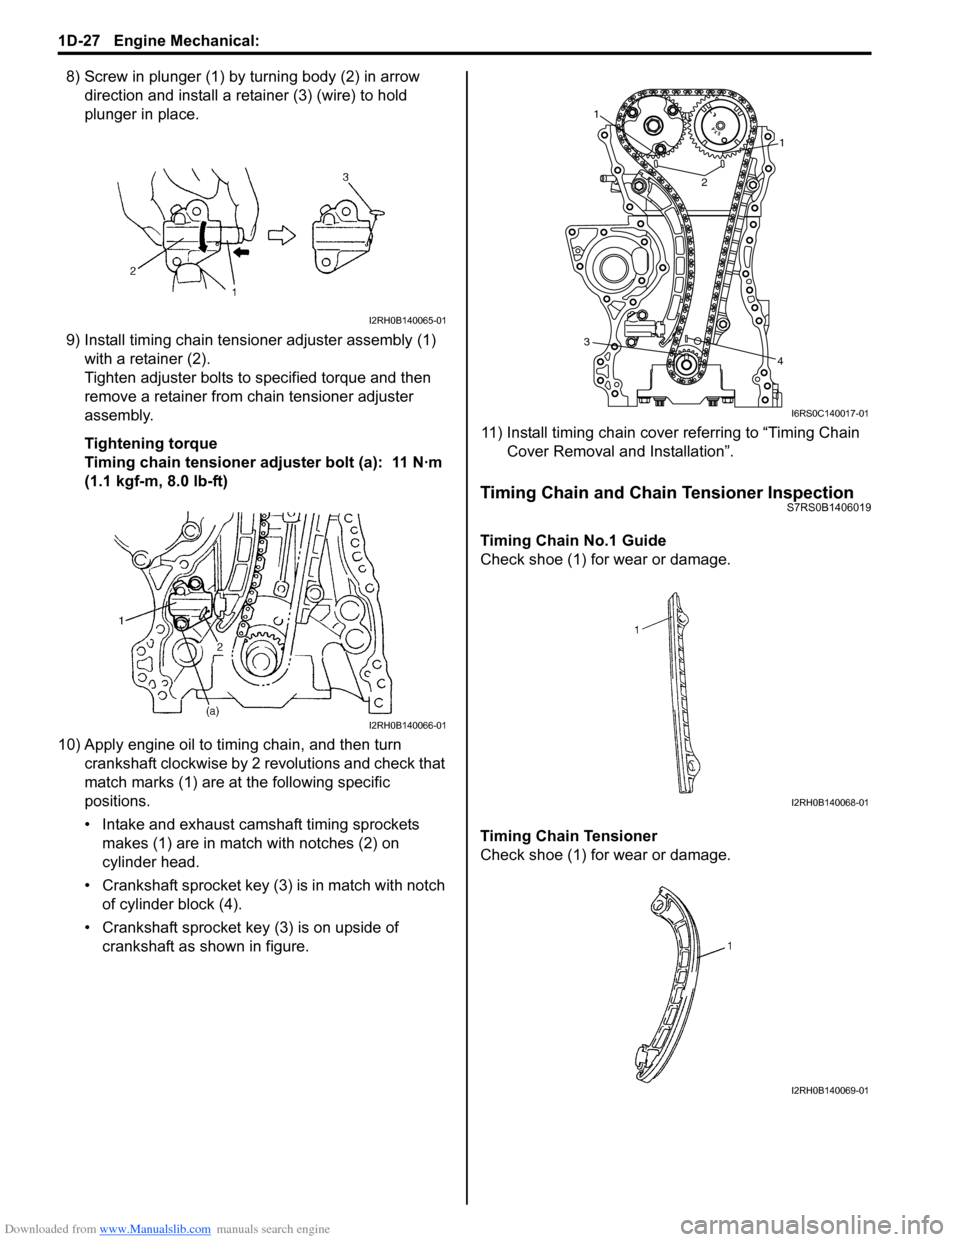 SUZUKI SWIFT 2007 2.G Service User Guide Downloaded from www.Manualslib.com manuals search engine 1D-27 Engine Mechanical: 
8) Screw in plunger (1) by turning body (2) in arrow direction and install a reta iner (3) (wire) to hold 
plunger in